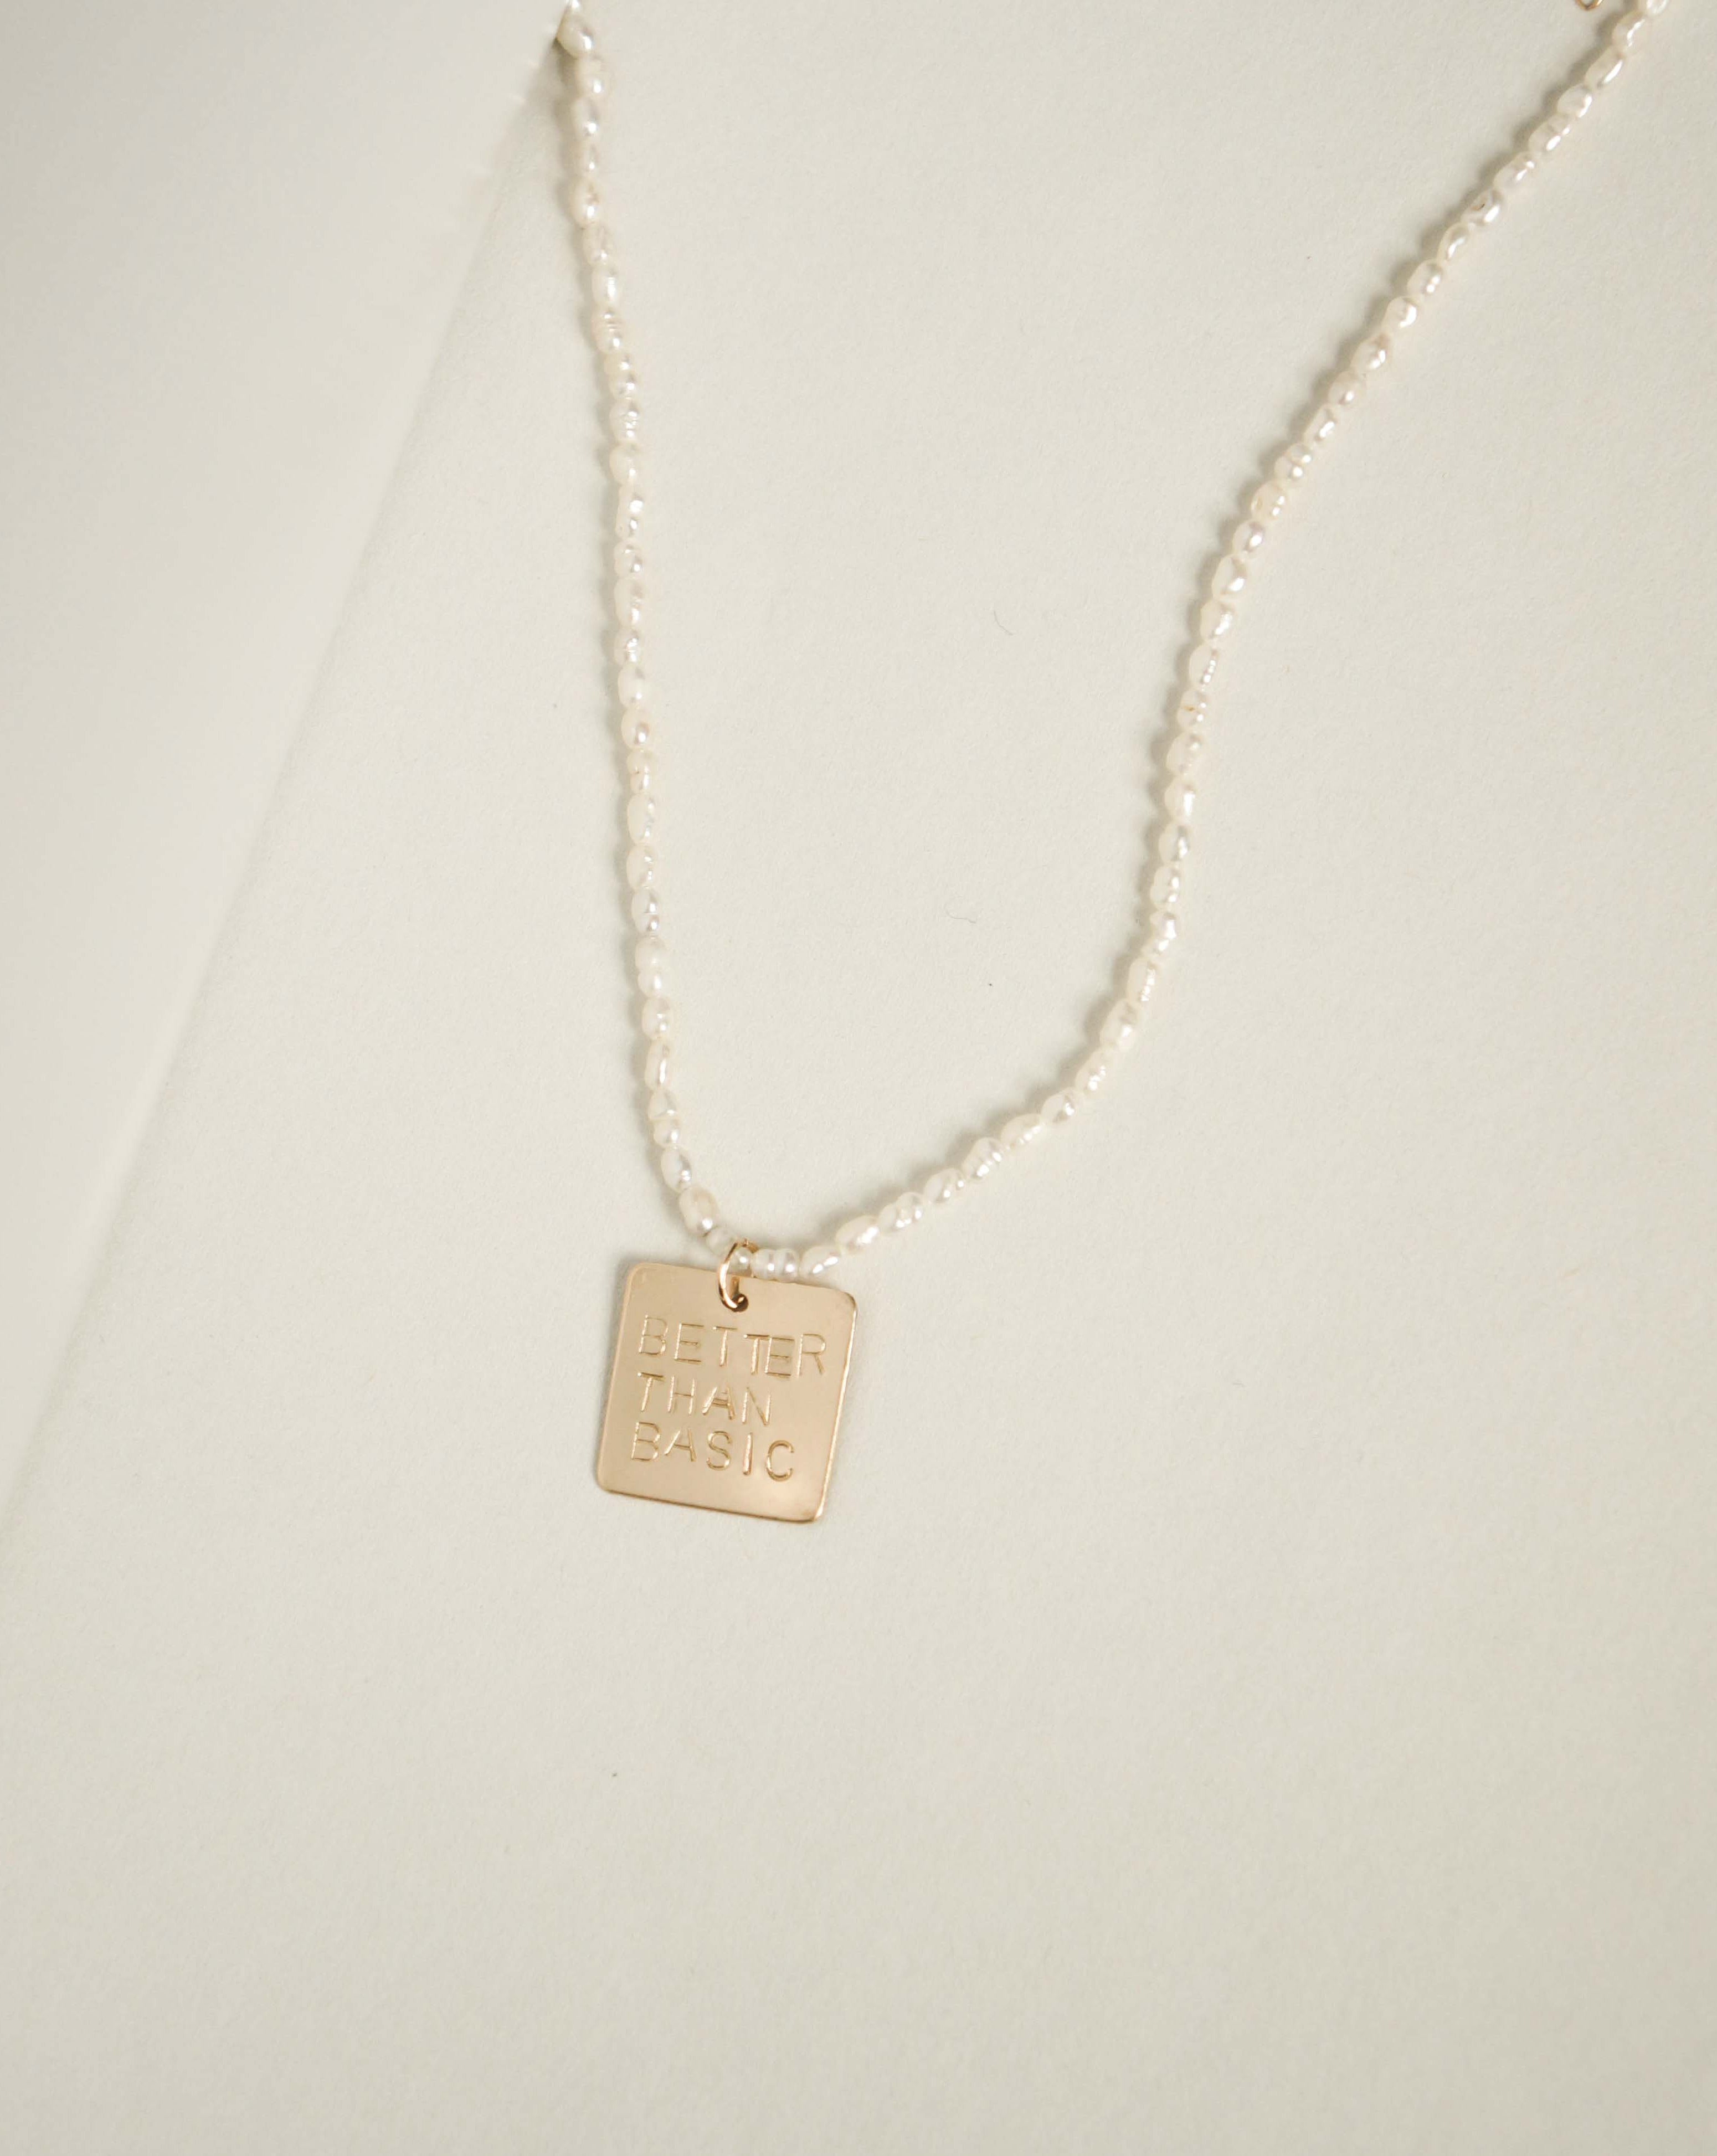 Magic Necklace by KOZAKH. A 16 to 18 inch adjustable length necklace with Freshwater rice Pearls strand, crafted in 14K Gold Filled, featuring a square pendant with an engraved quote.